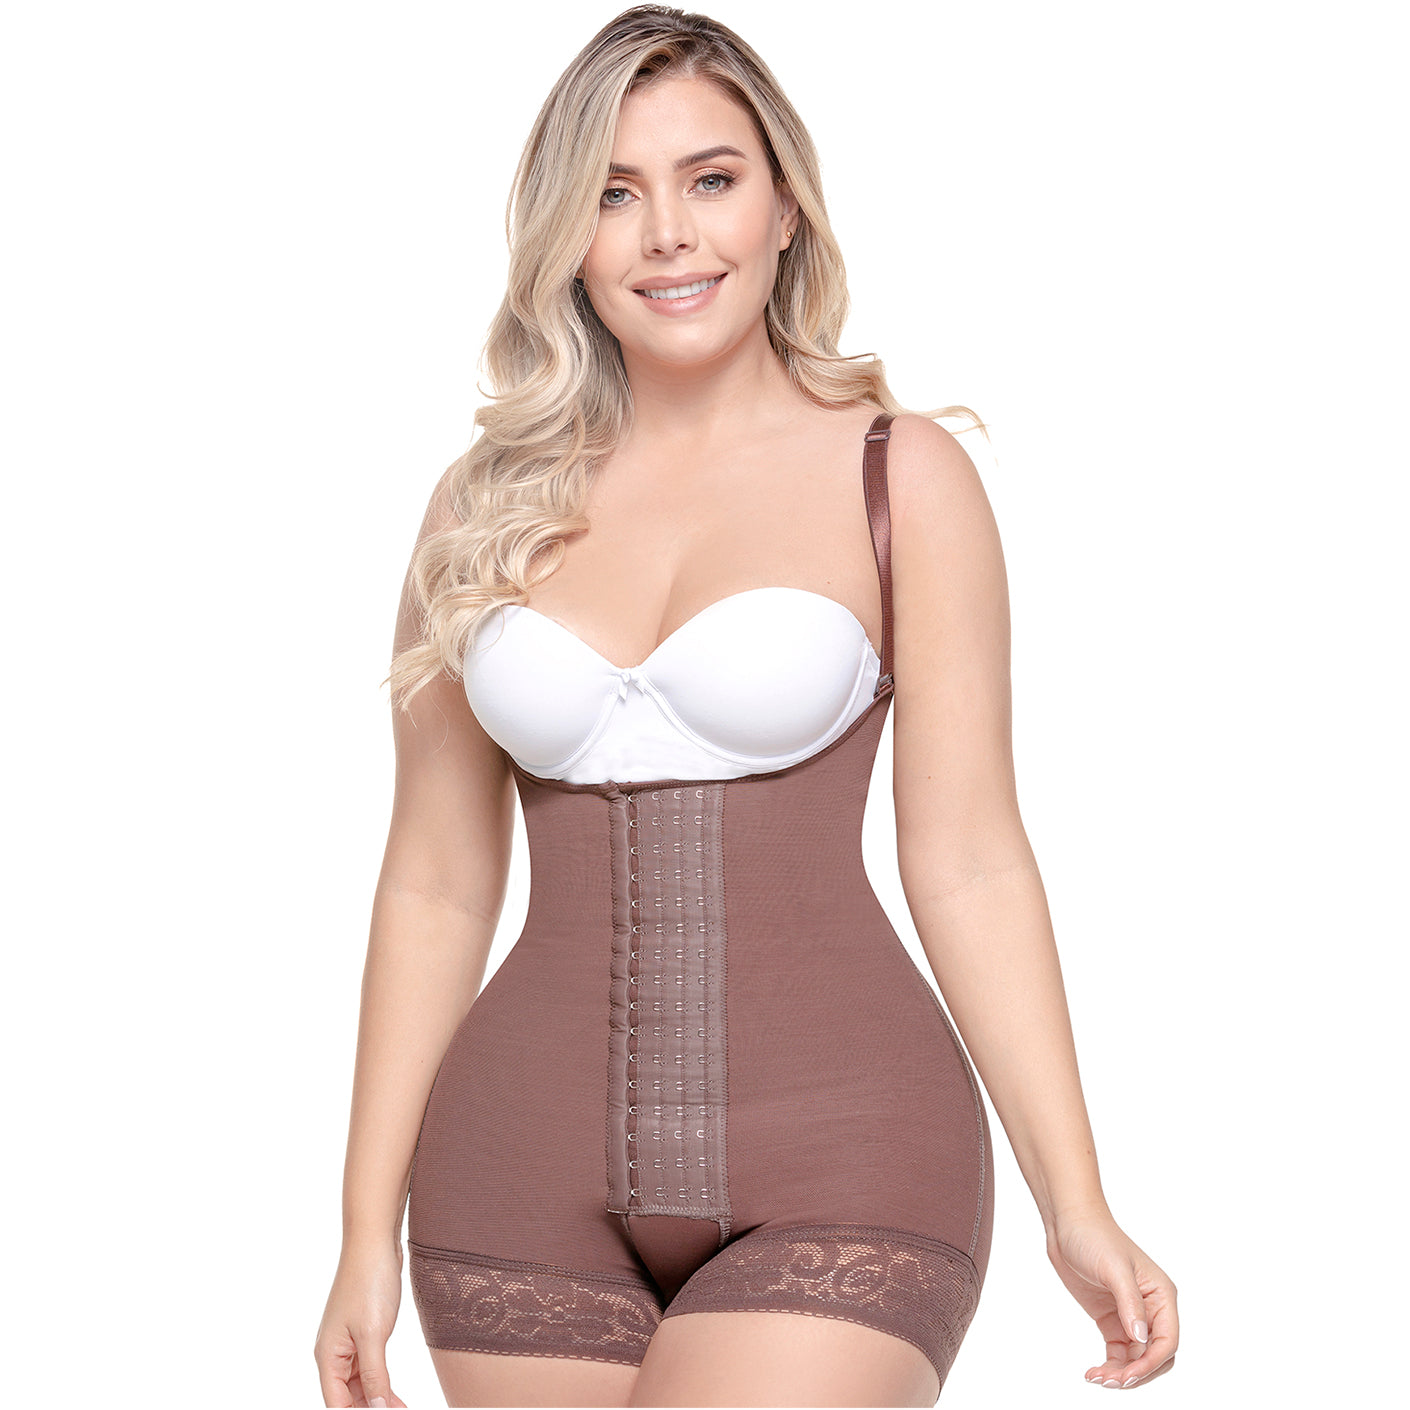 Silicone Shapewear For Women Stretch, Lift & Support For Big Buttocks And  Full Bust Ideal For Workout And Comfortable Fit From Shenfa03, $162